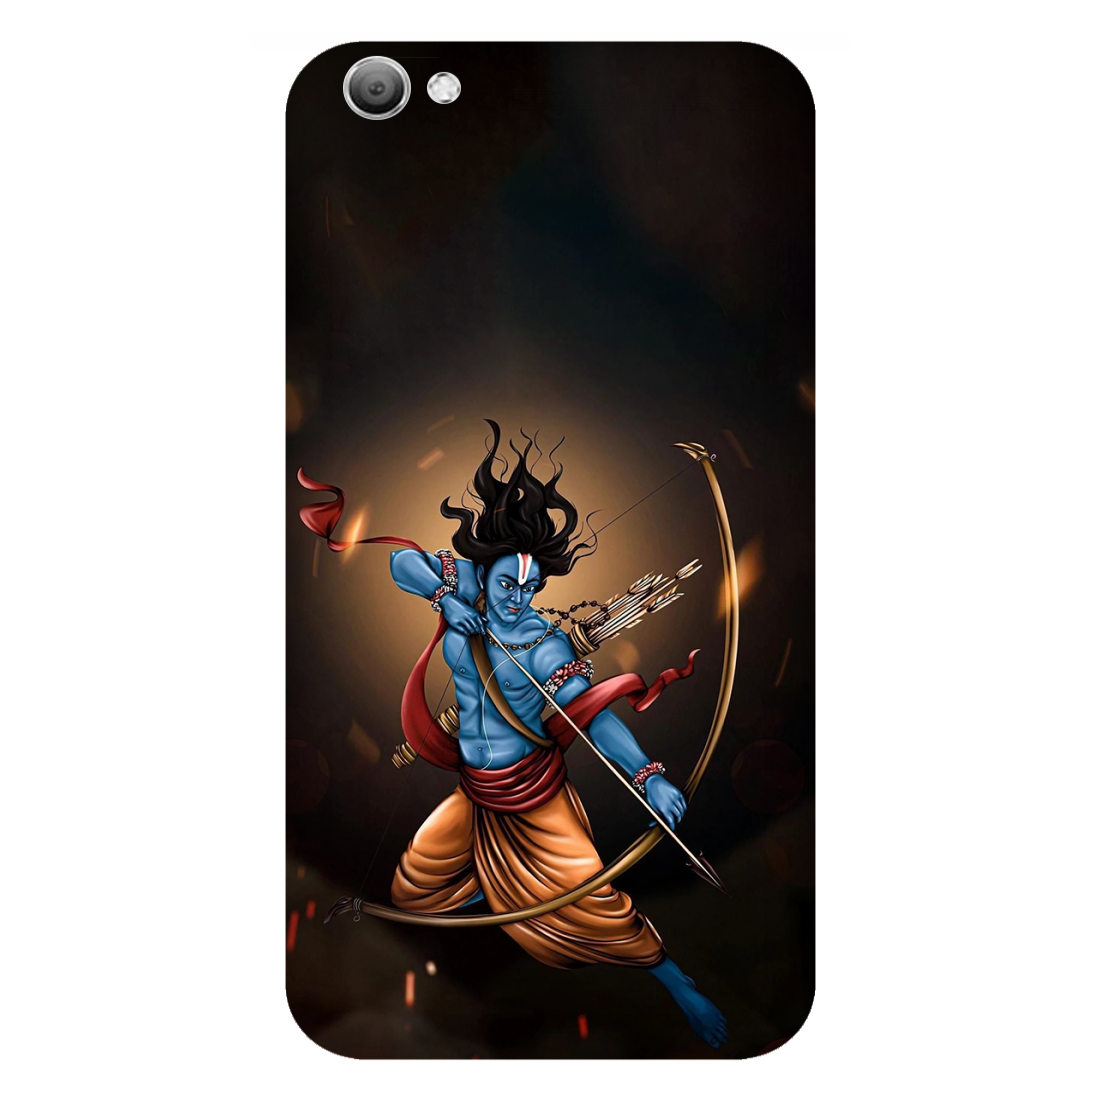 Warrior with Bow in Mystical Light Case Vivo V5